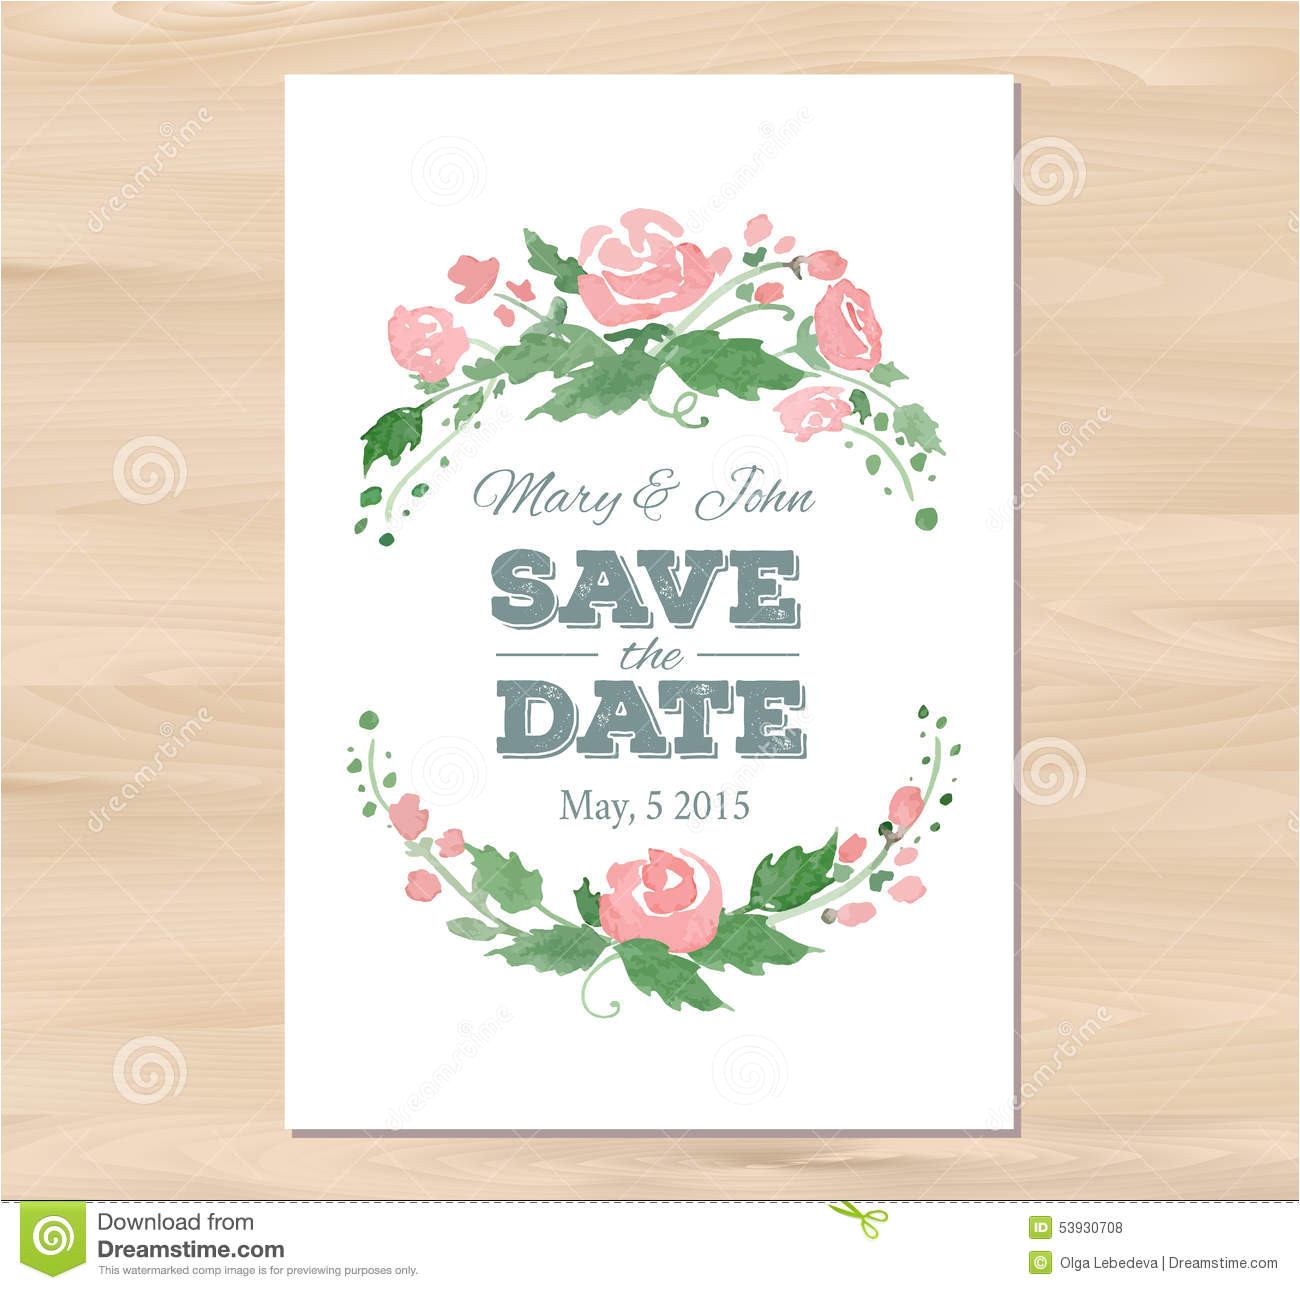 stock illustration vector wedding invitation watercolor flowers illustration save date typographic elements card template wooden image53930708